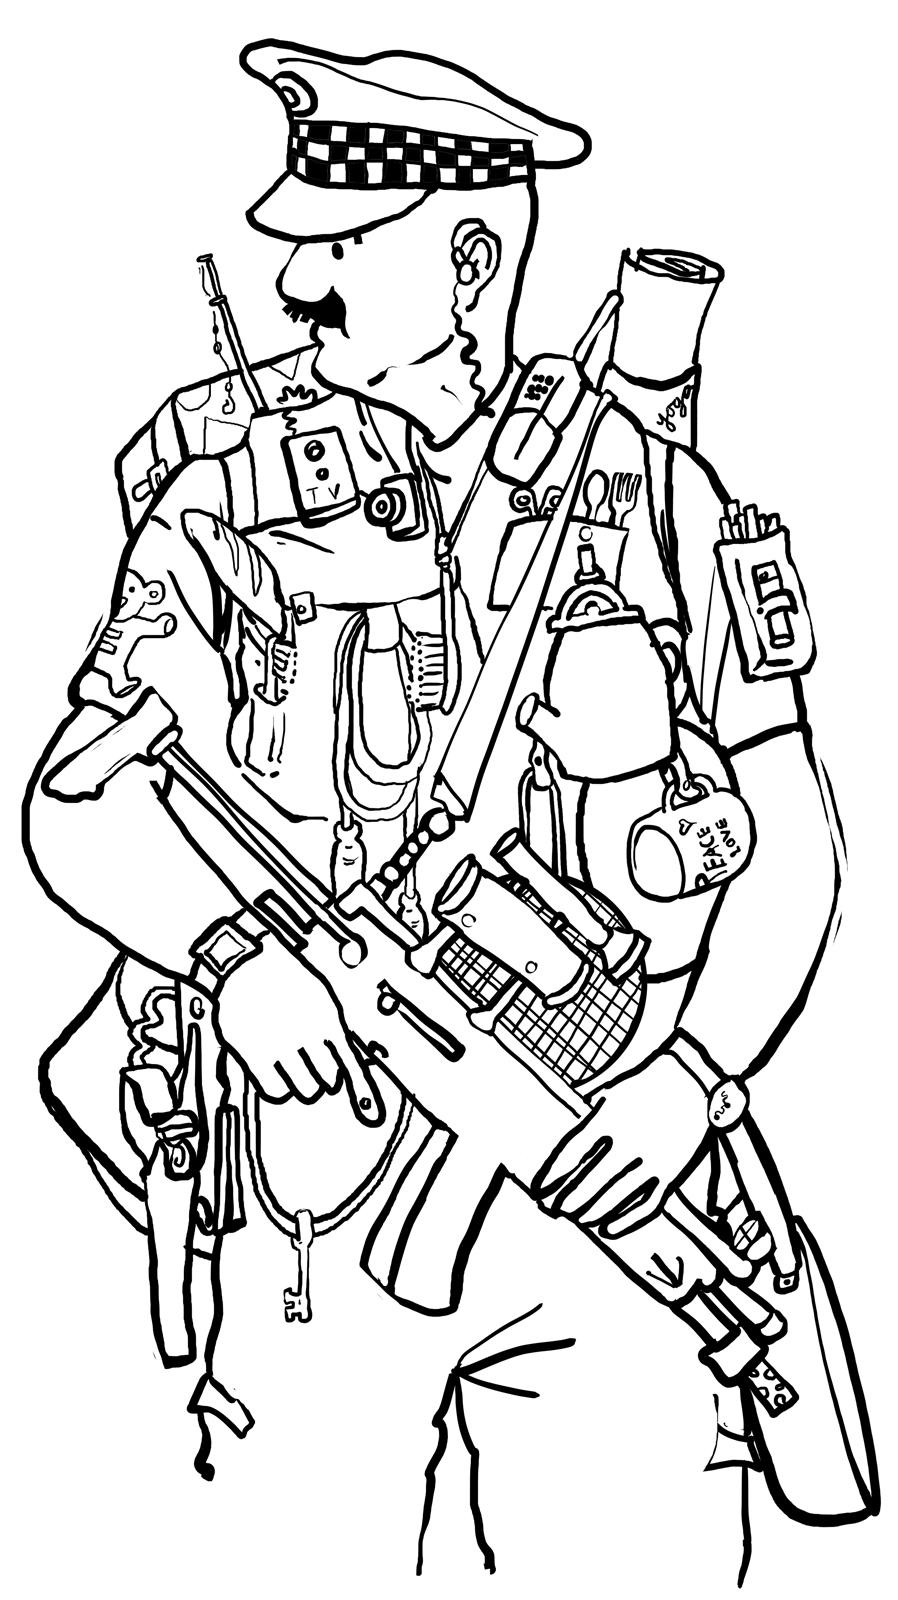 police coloring page police officer coloring pages sketch coloring page page police coloring 